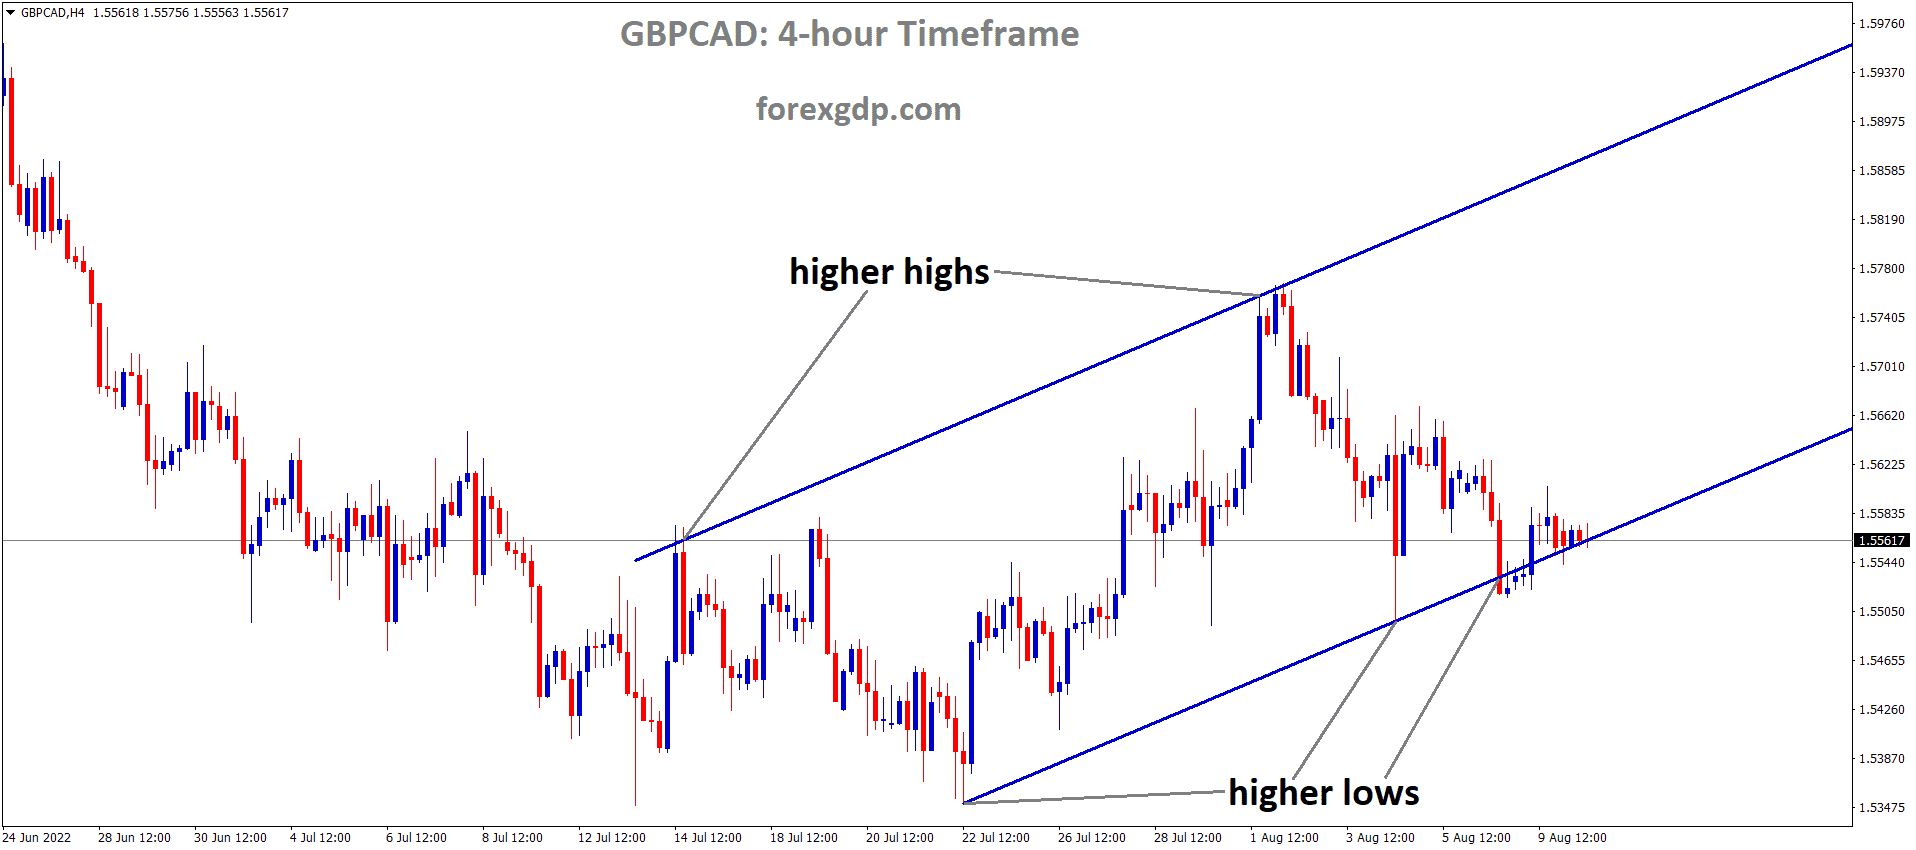 GBPCAD is moving in an Ascending channel and the Market has reached the higher low area of the channel